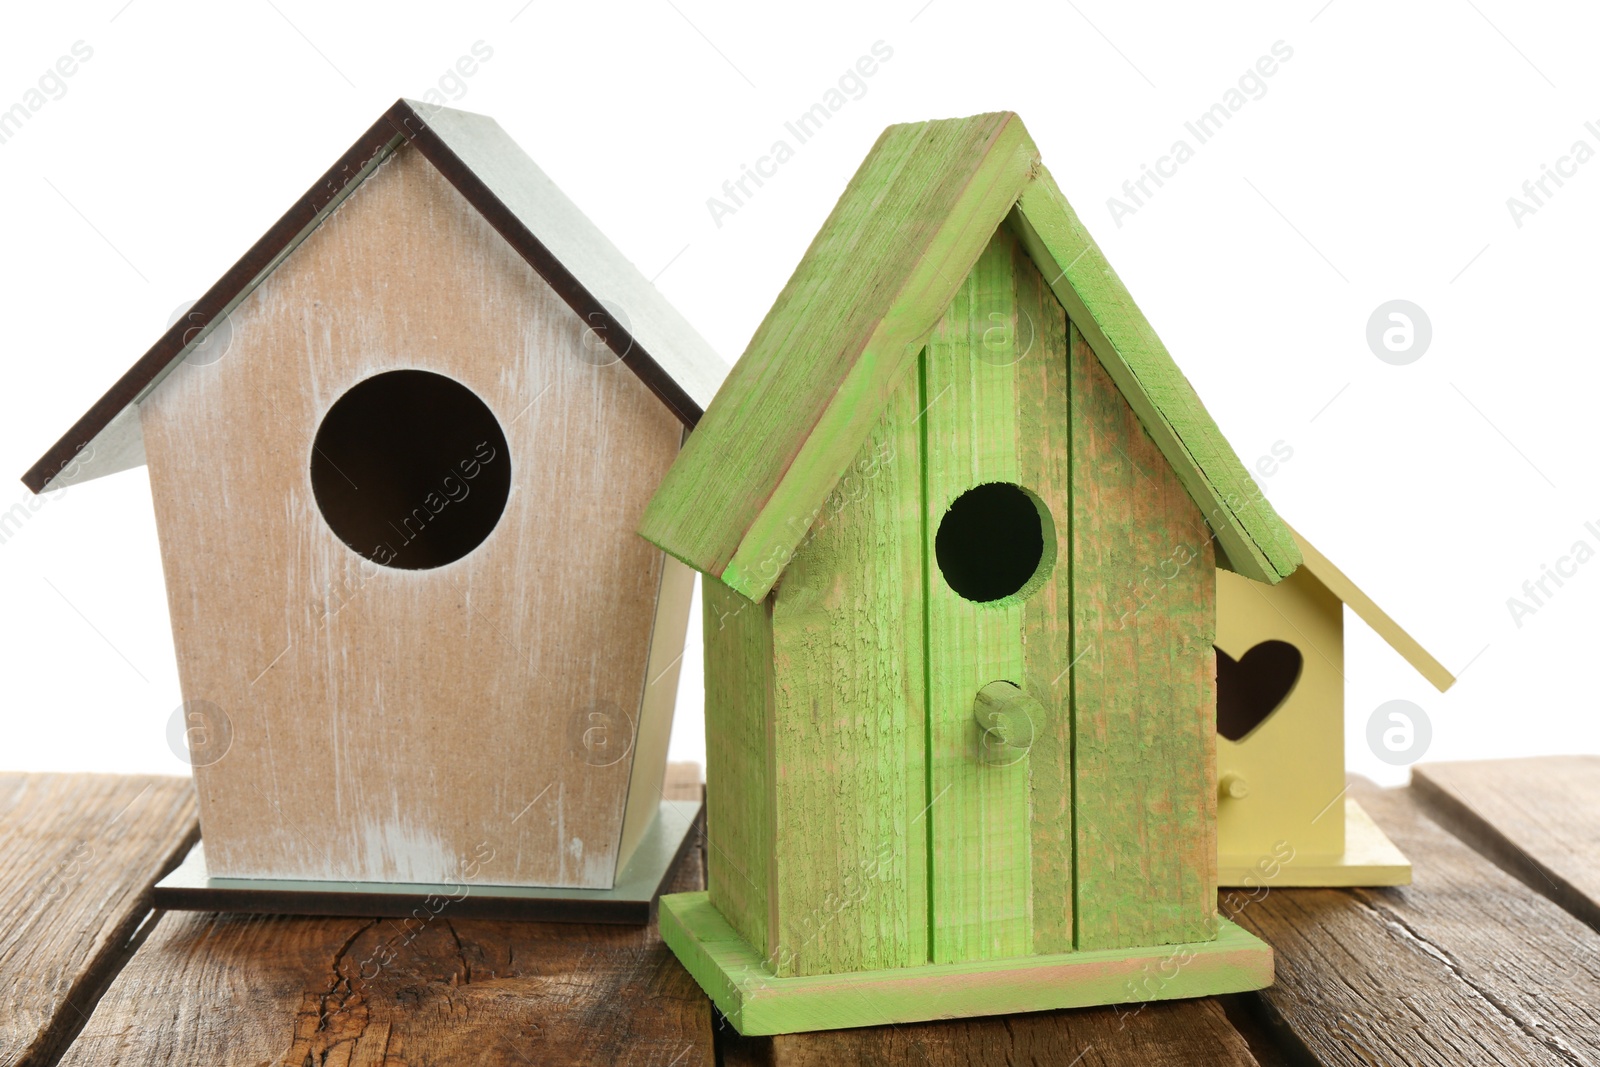 Photo of Three different bird houses on wooden table against white background